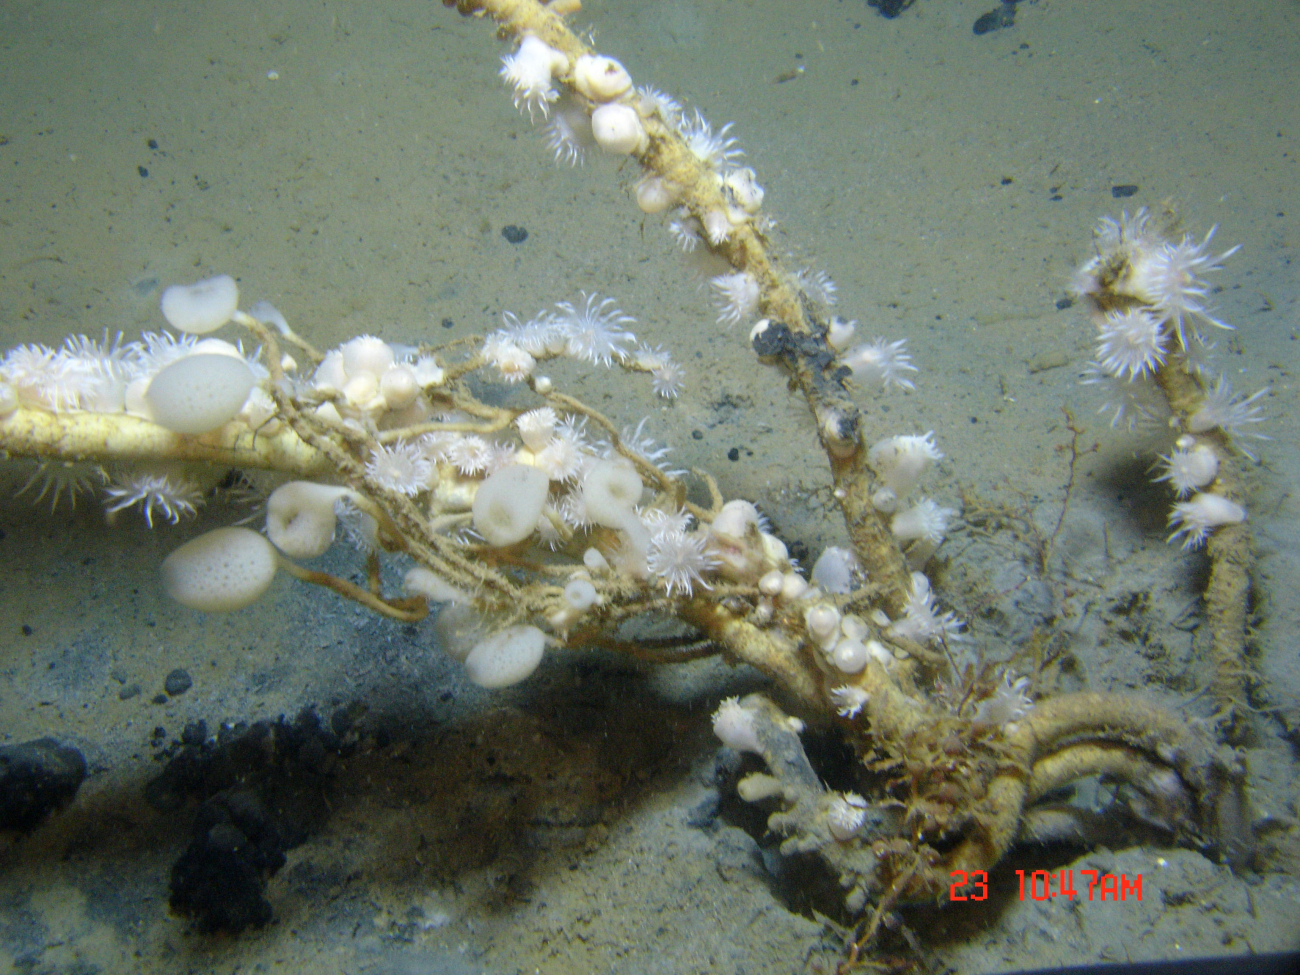 Worm tubes at a cold seep site covered with small dandelion-like white anemonesand stalked sponges